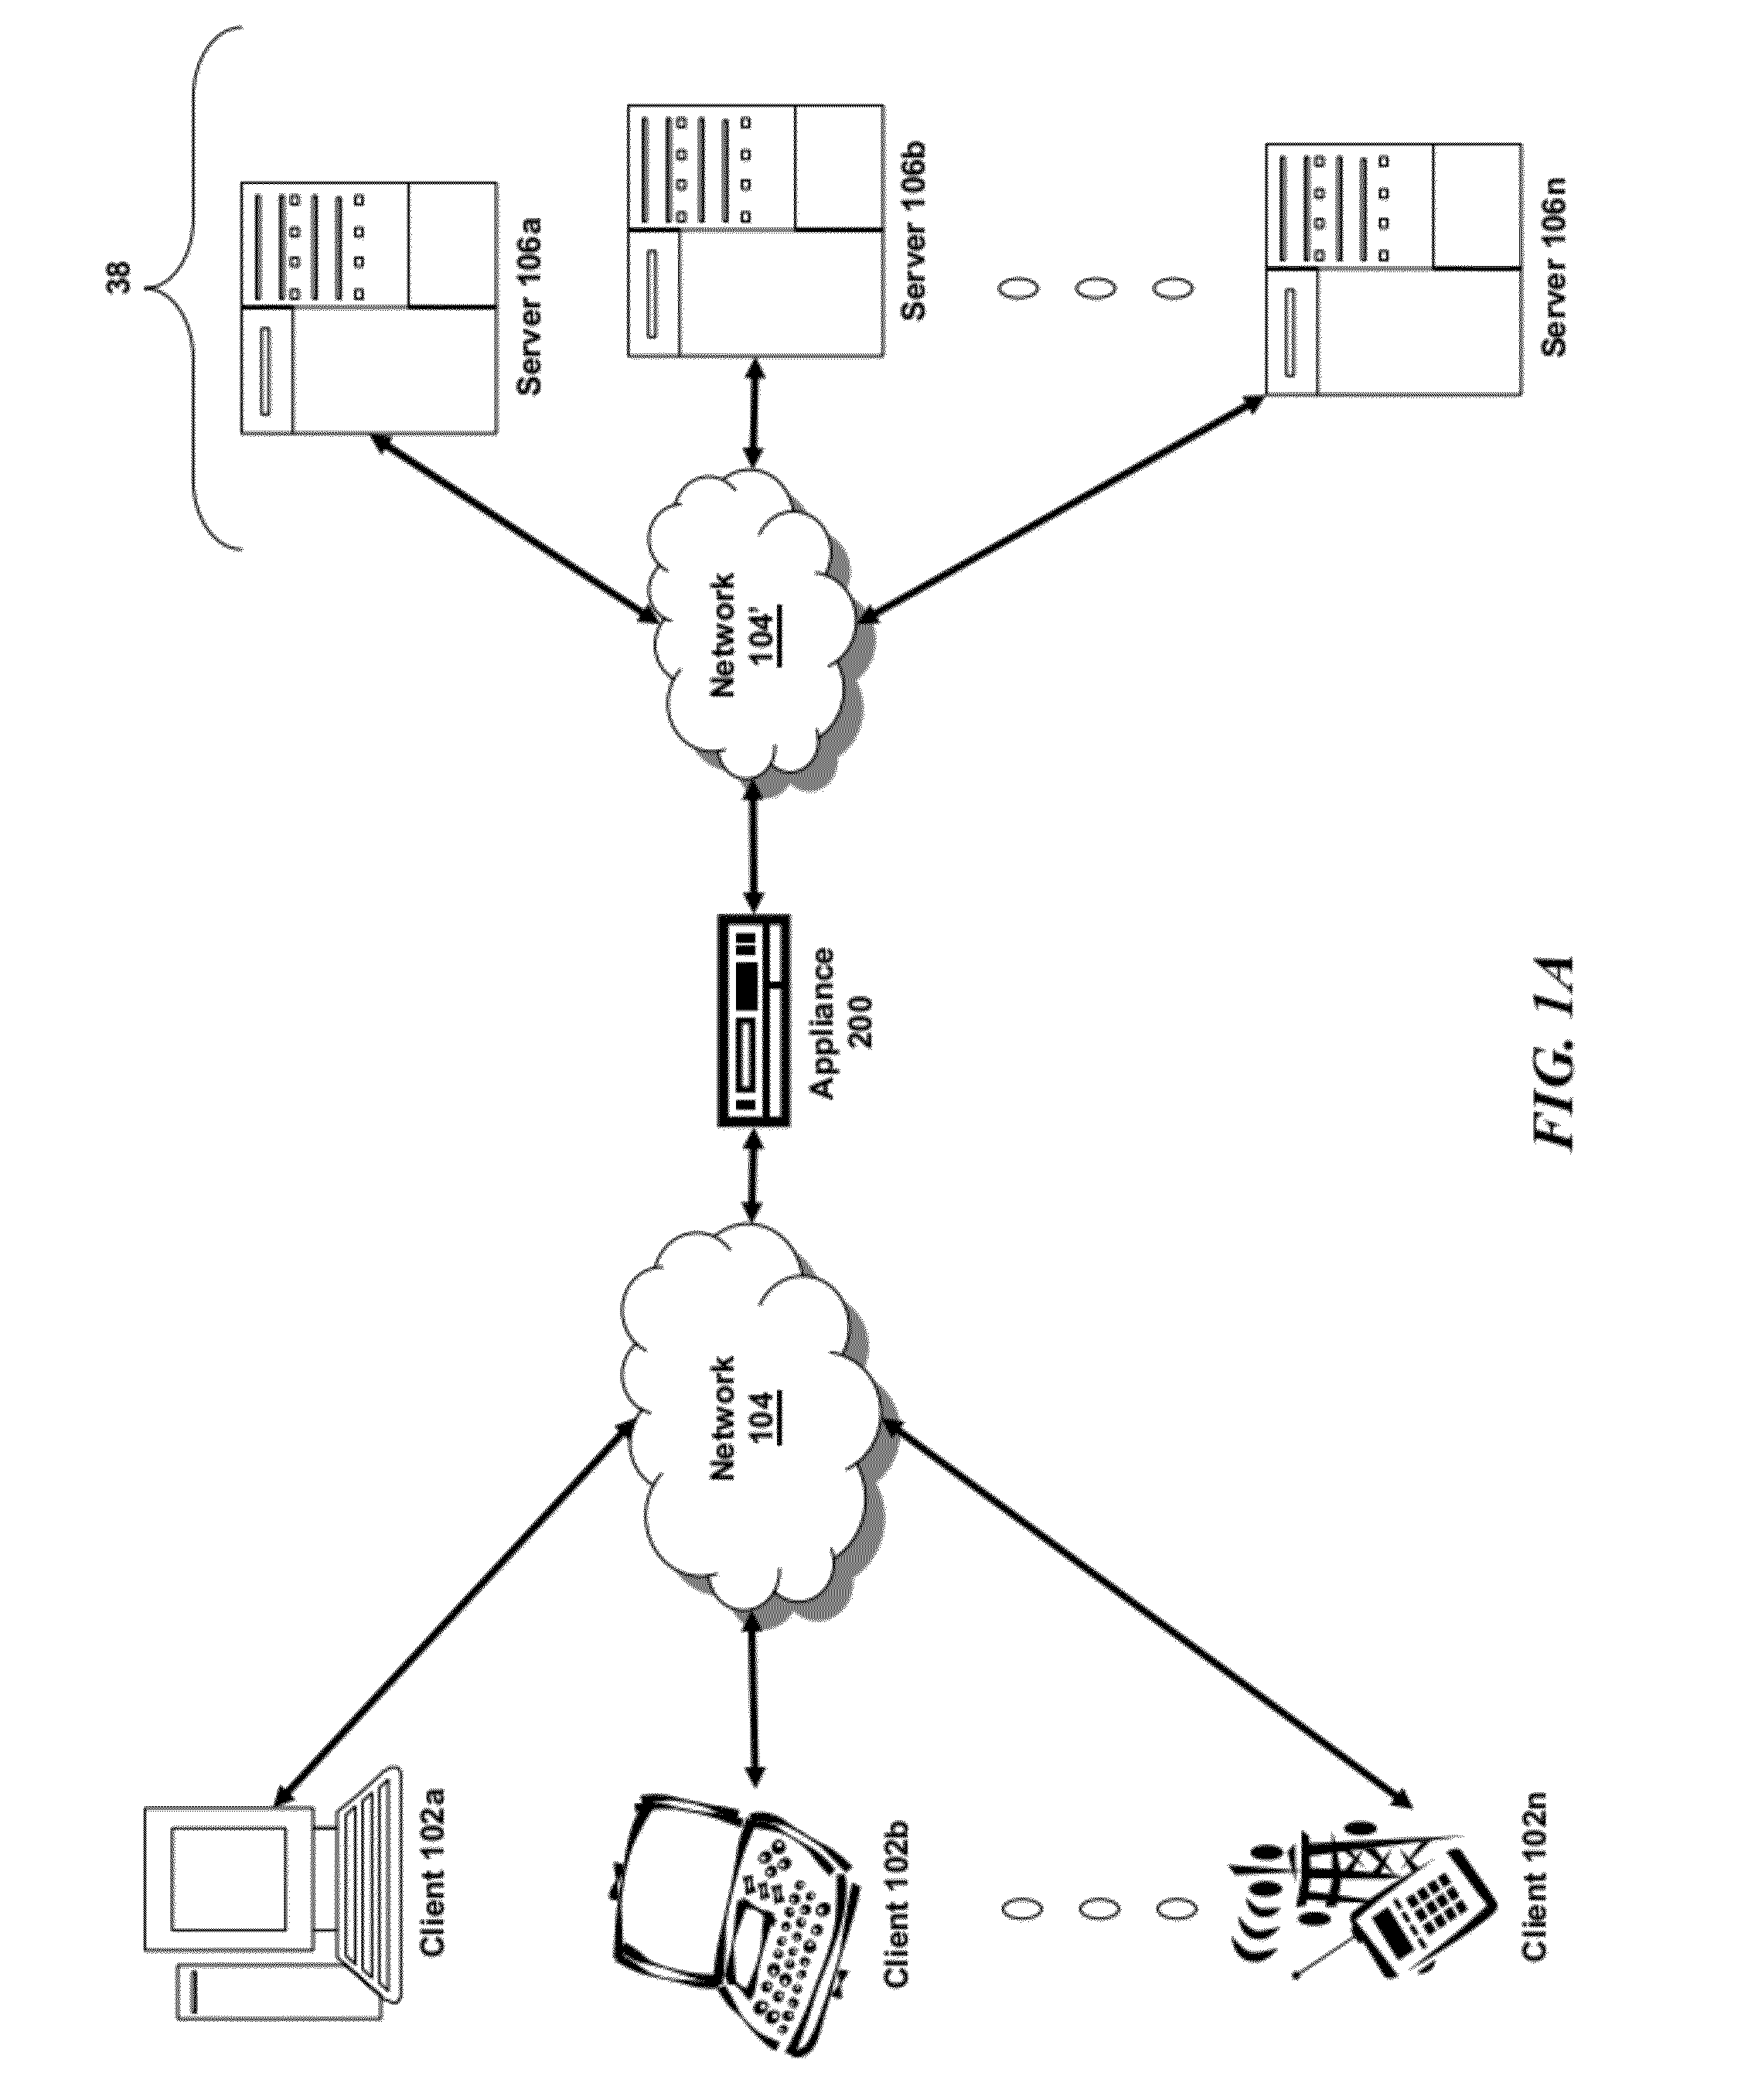 Systems and methods for cloud bridging between public and private clouds